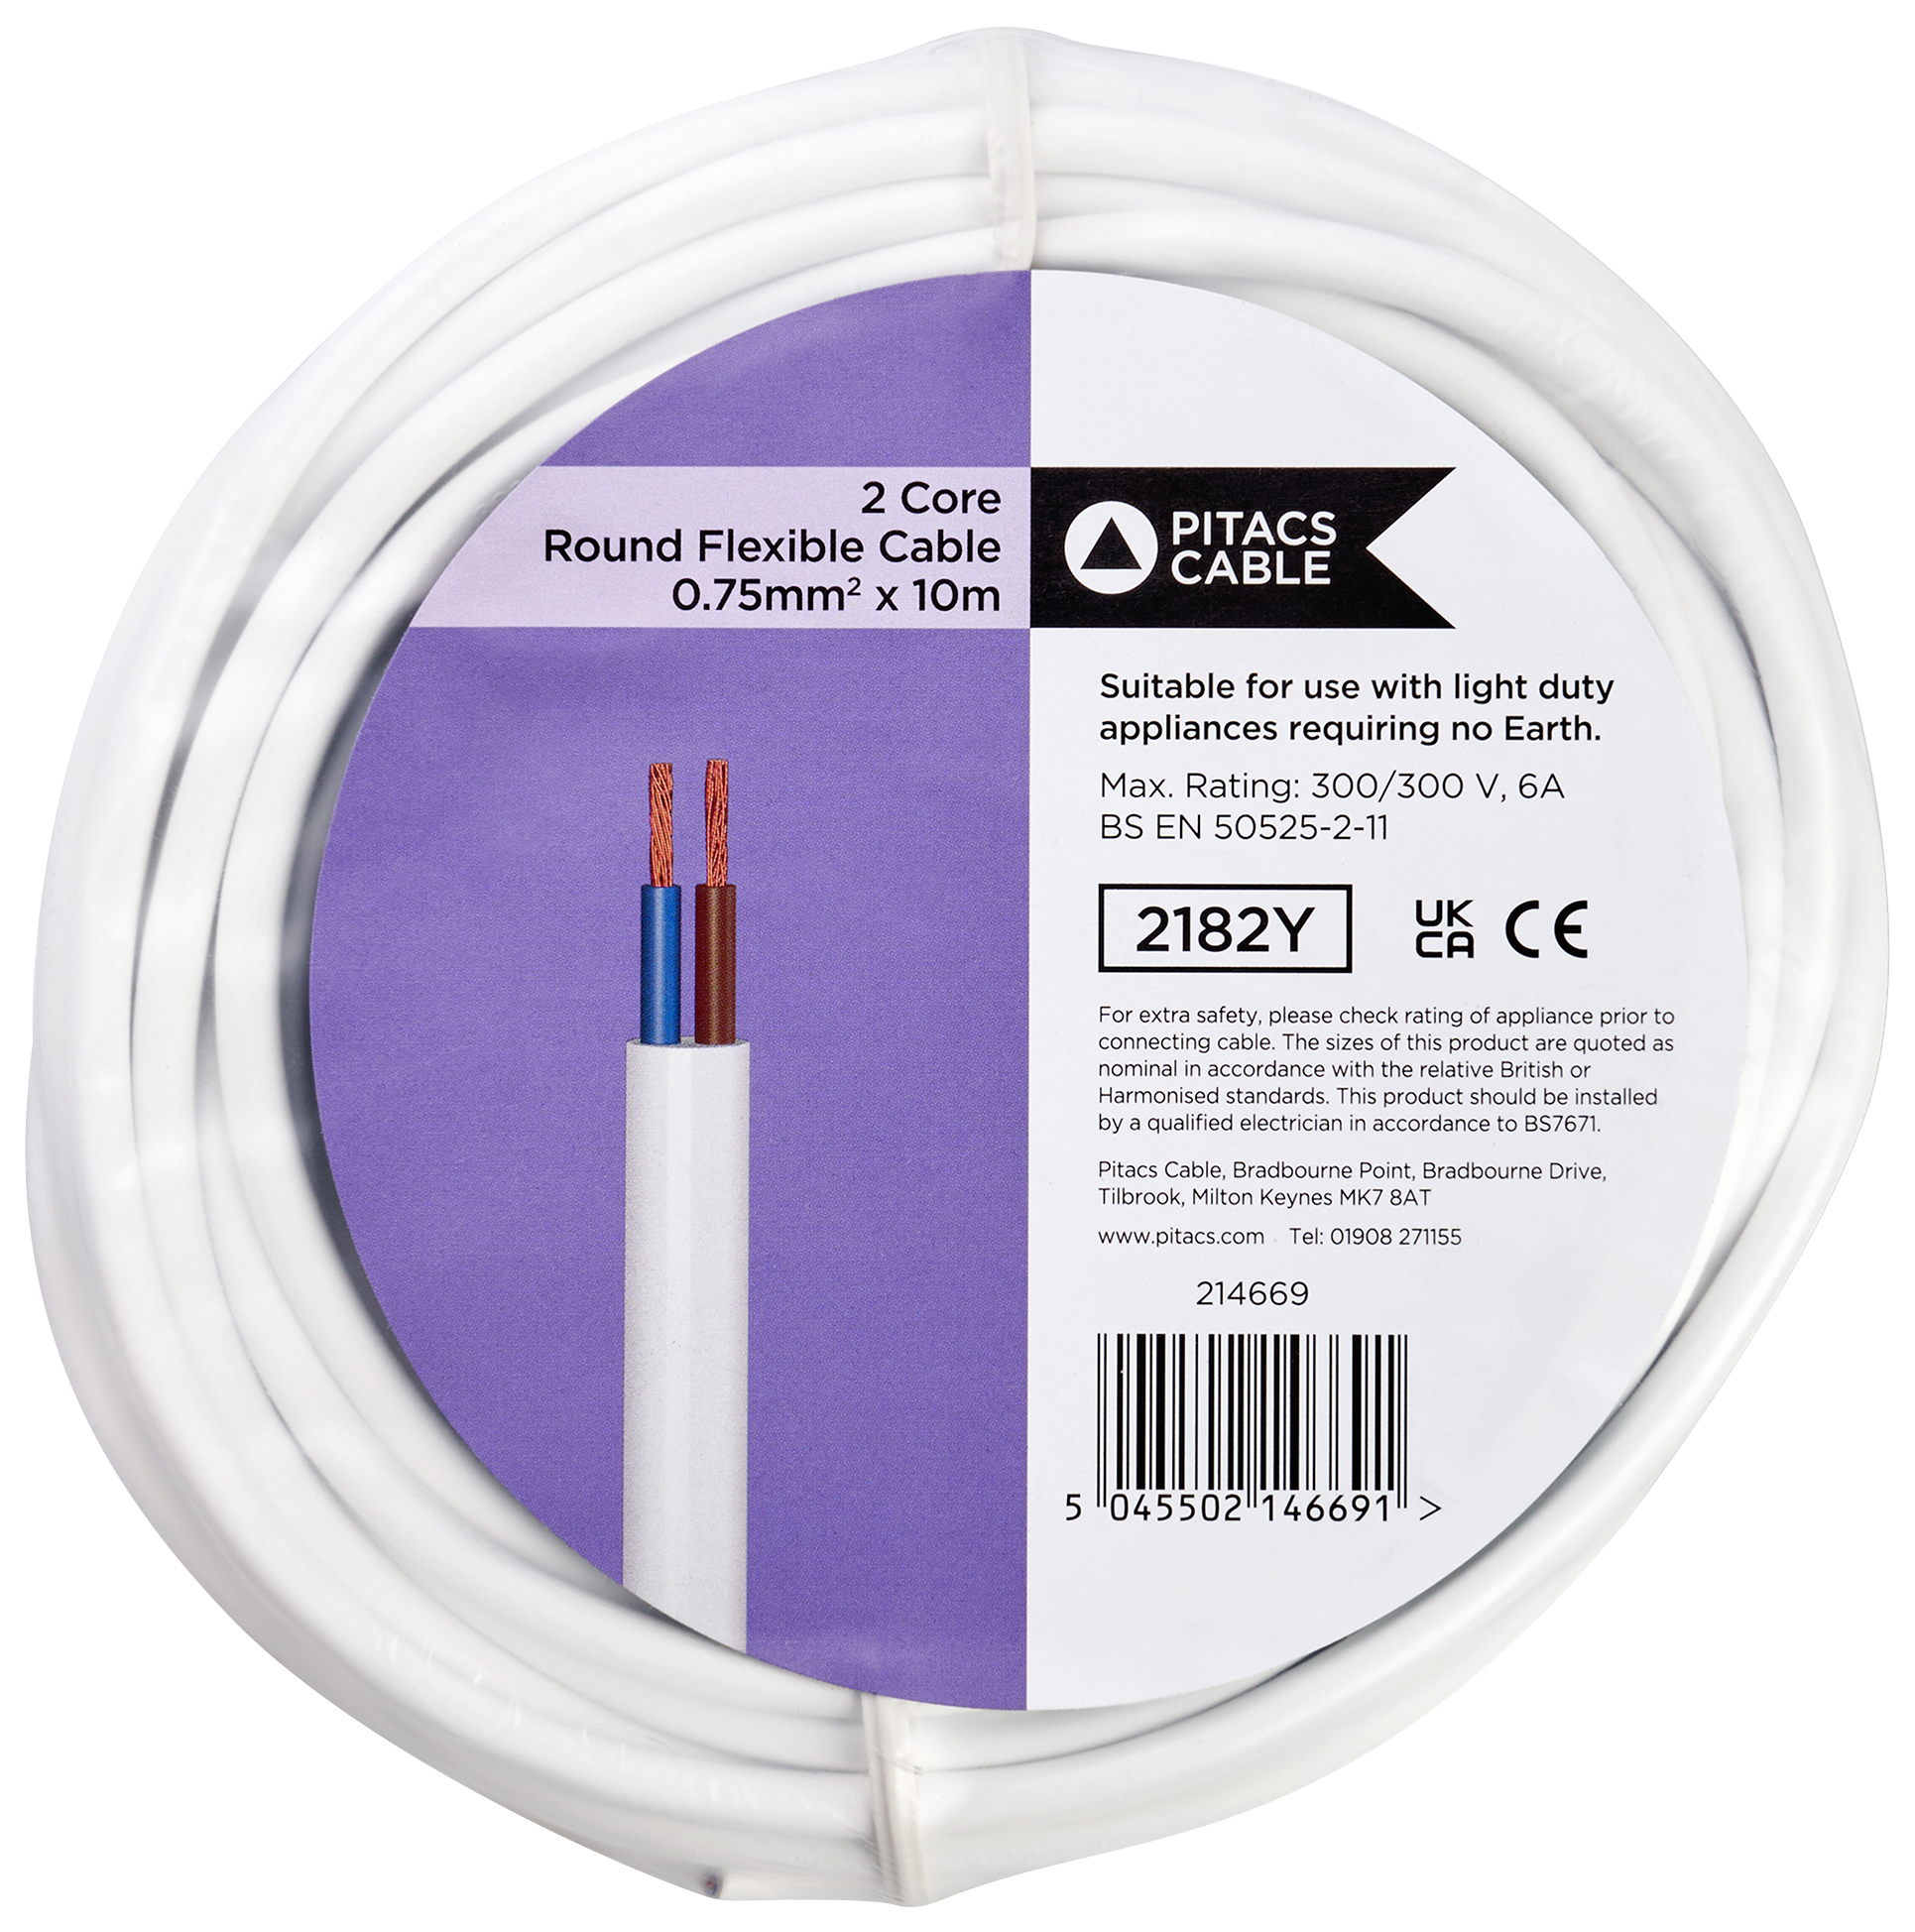 2 Core 2182Y White Round Flexible Cable - 0.75mm2 - 10m